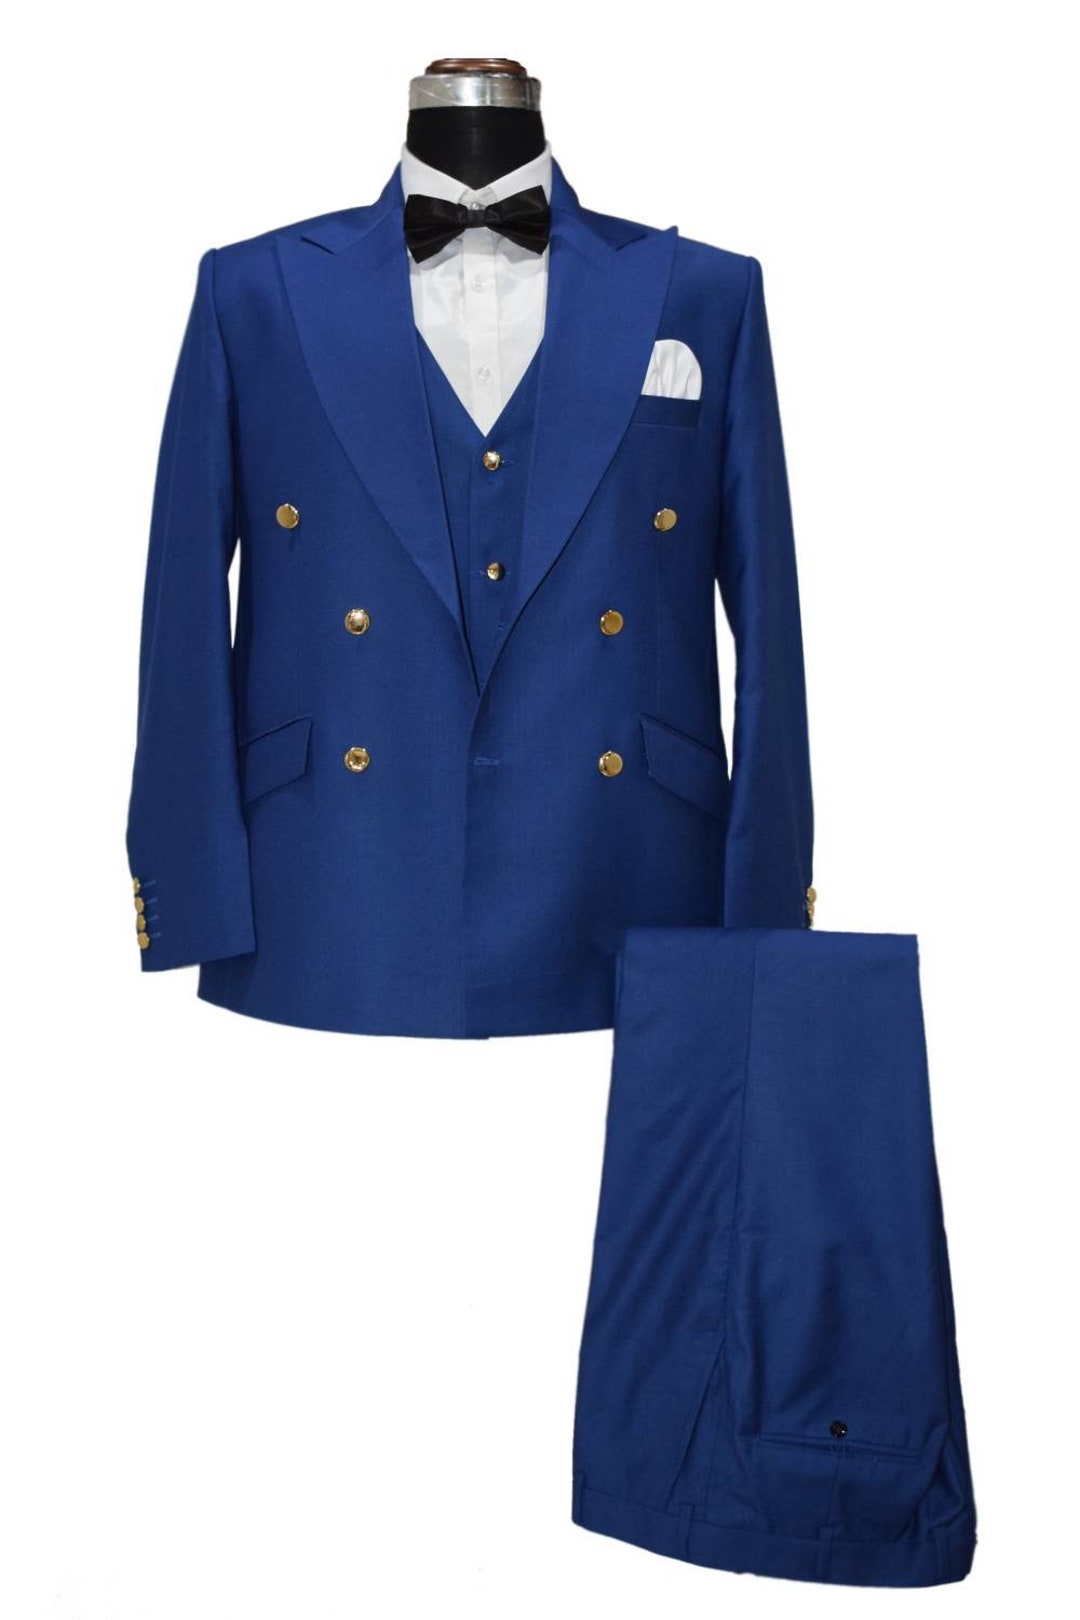 Men Royal Blue Suits With Golden Buttons Wedding Dinner Party - Etsy